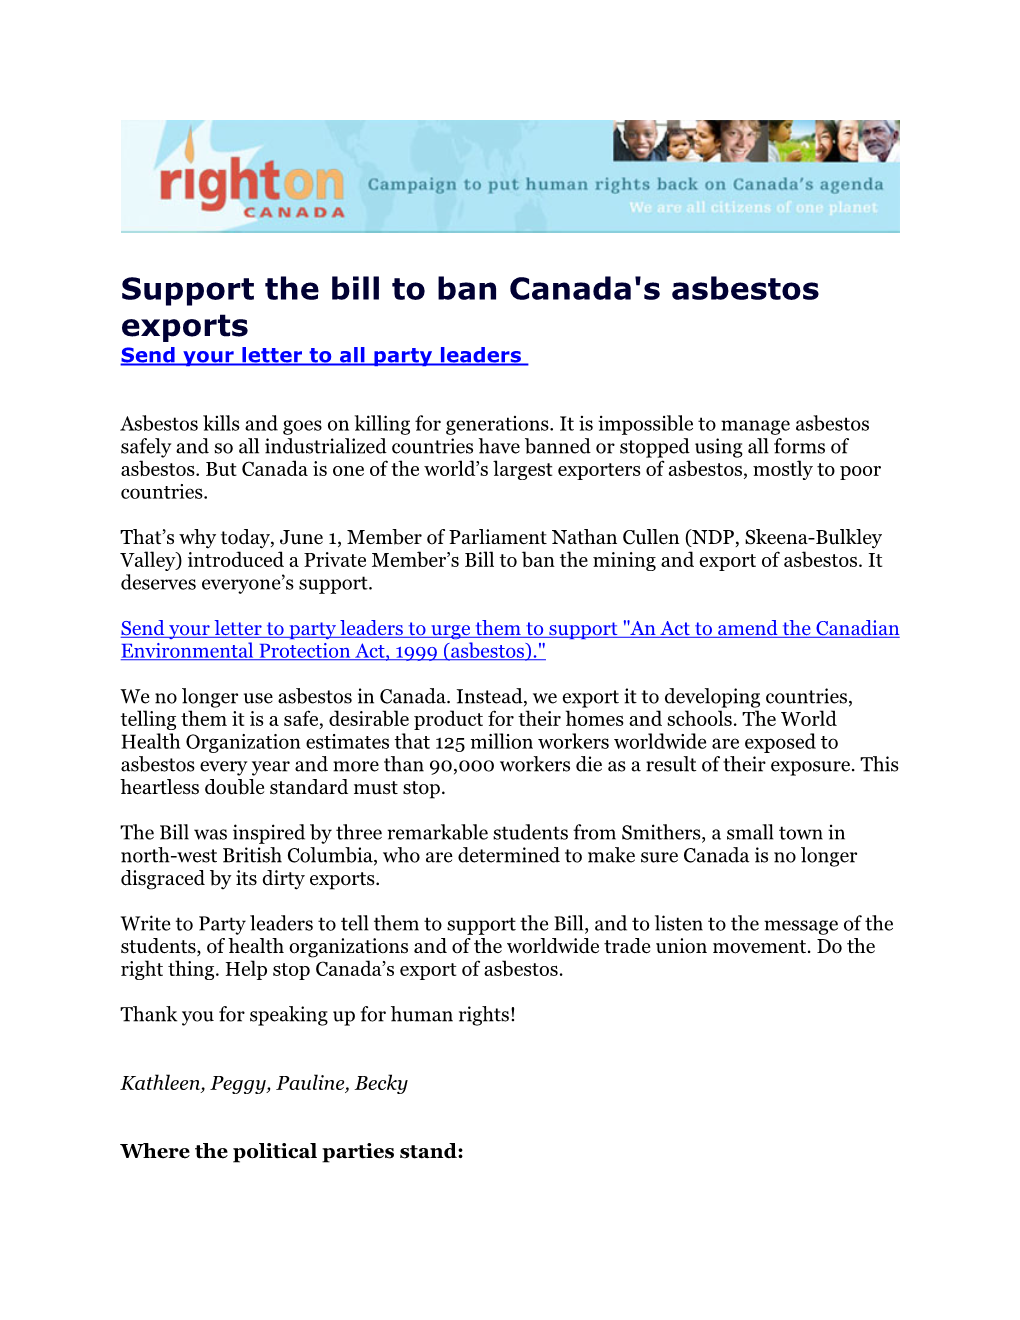 Support the Bill to Ban Canada's Asbestos Exports Send Your Letter to All Party Leaders